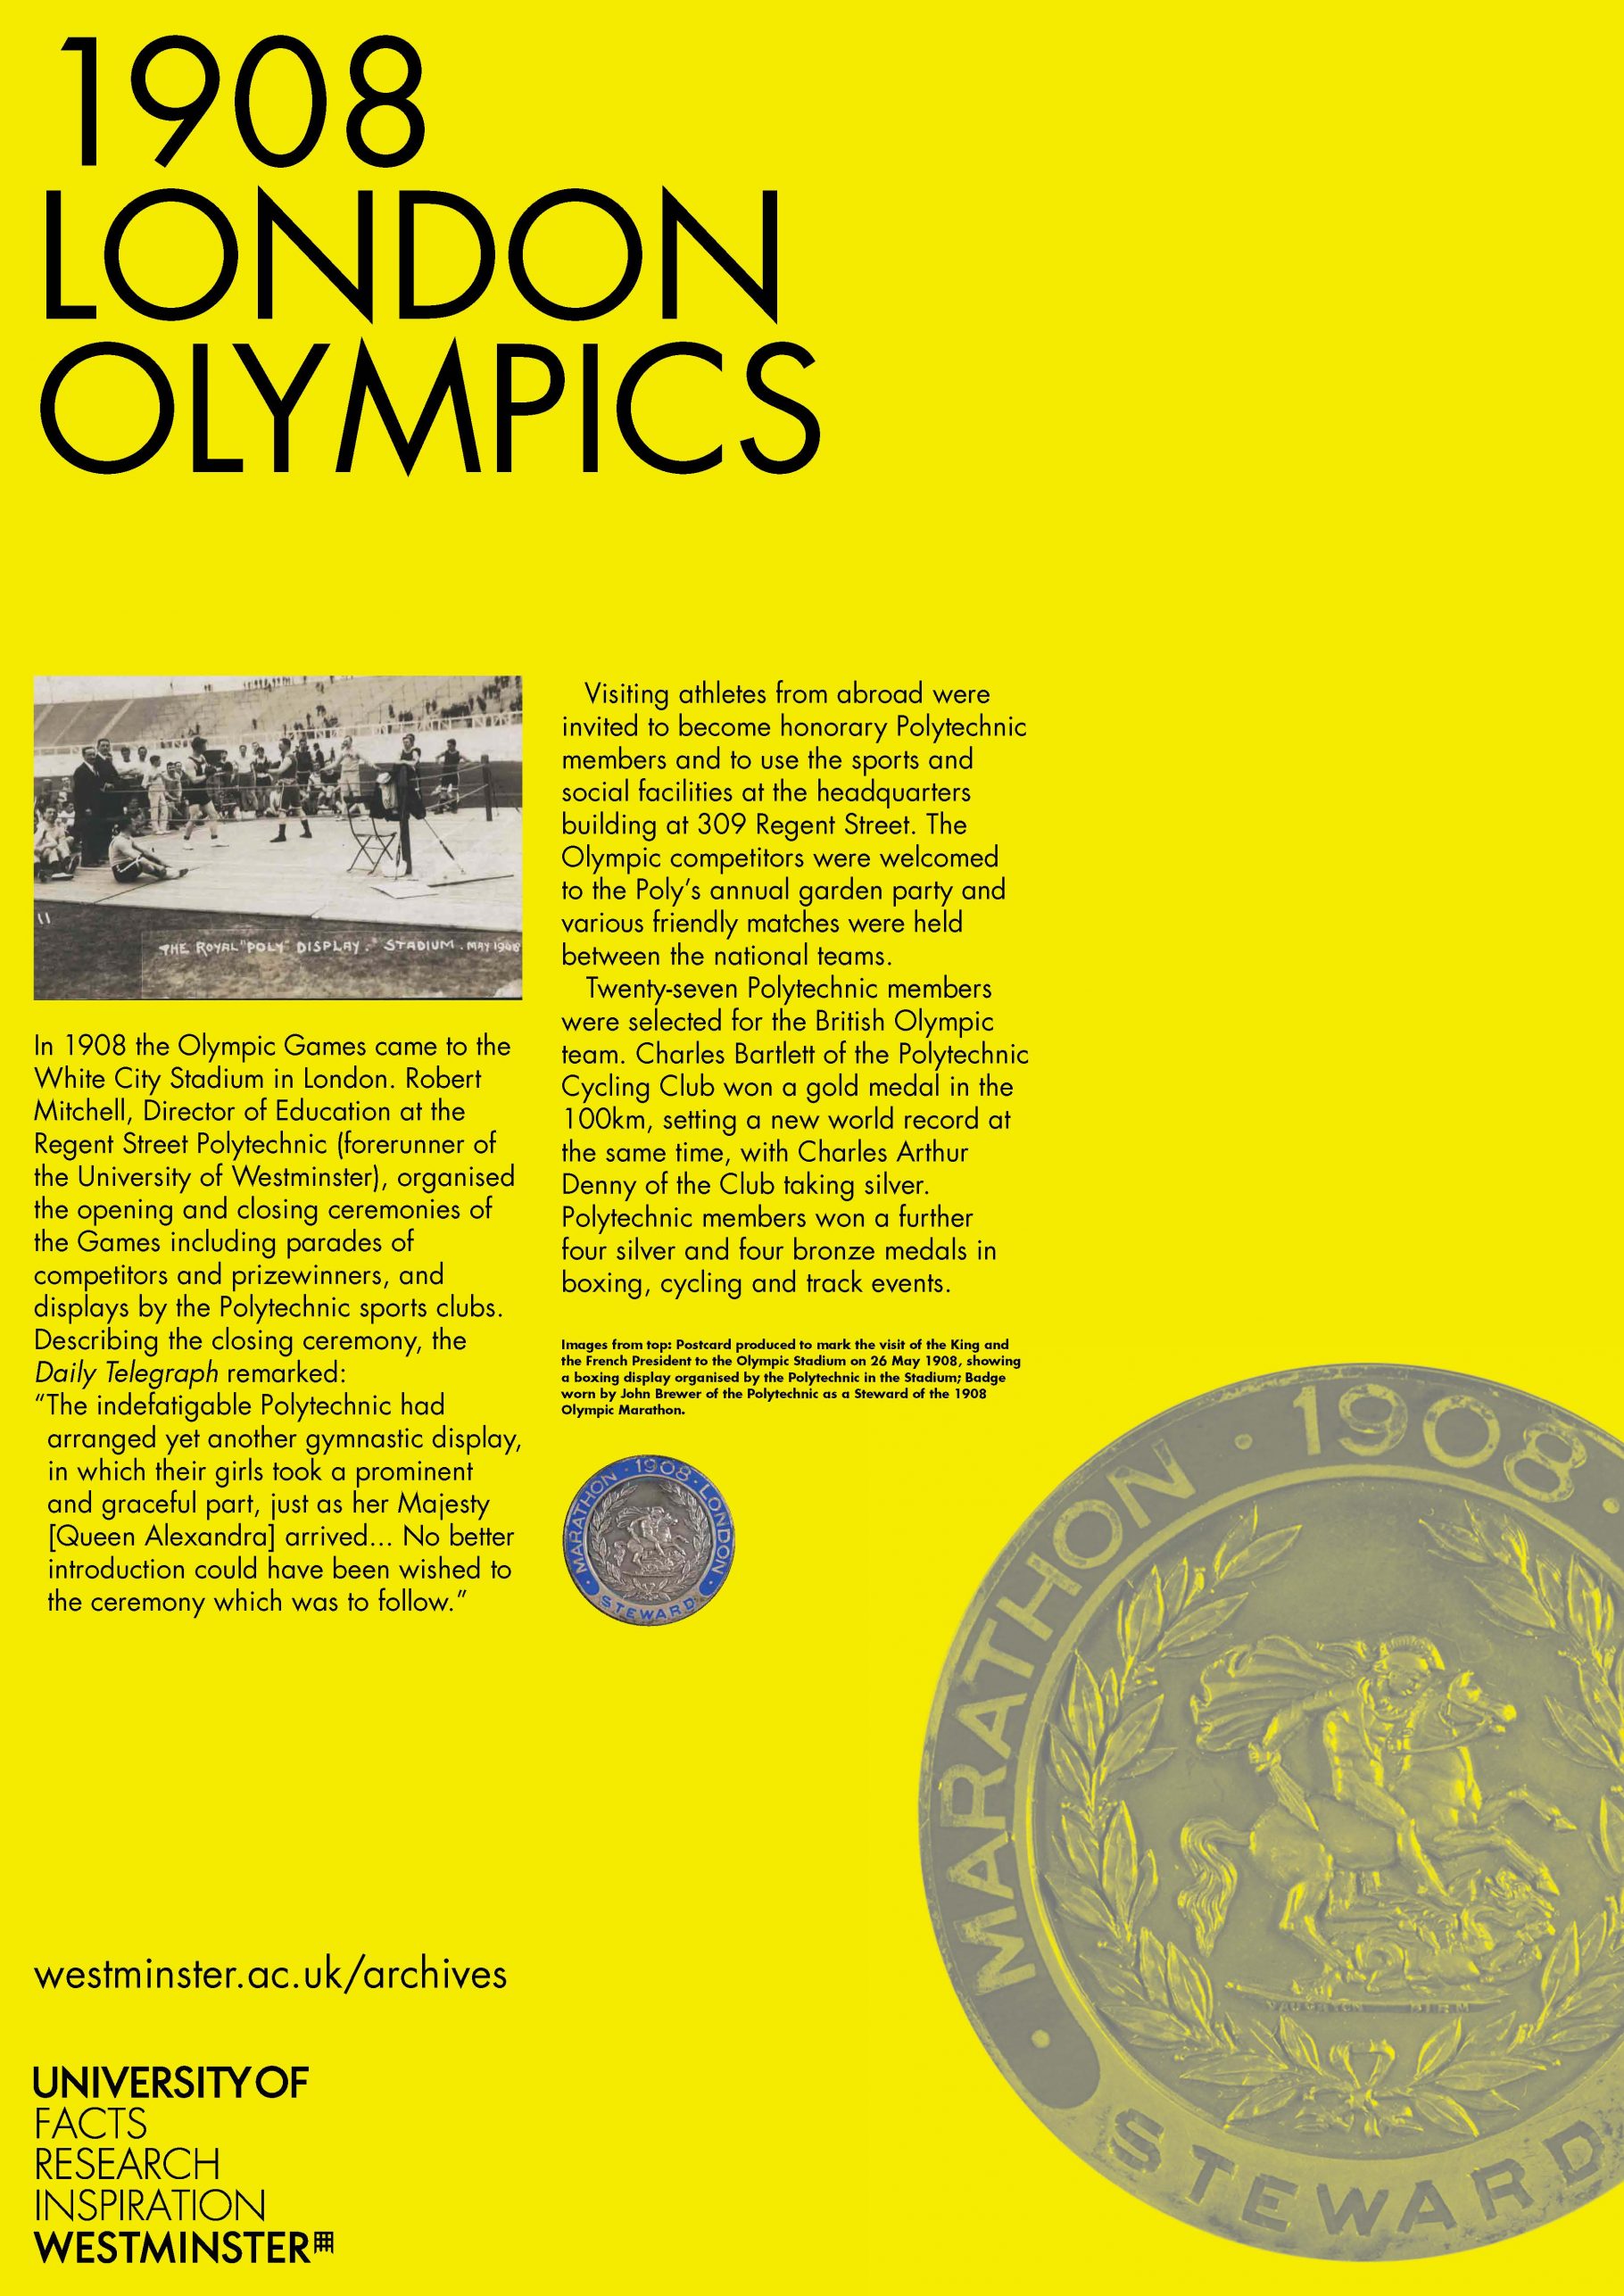 information poster on 1908 London Olympics